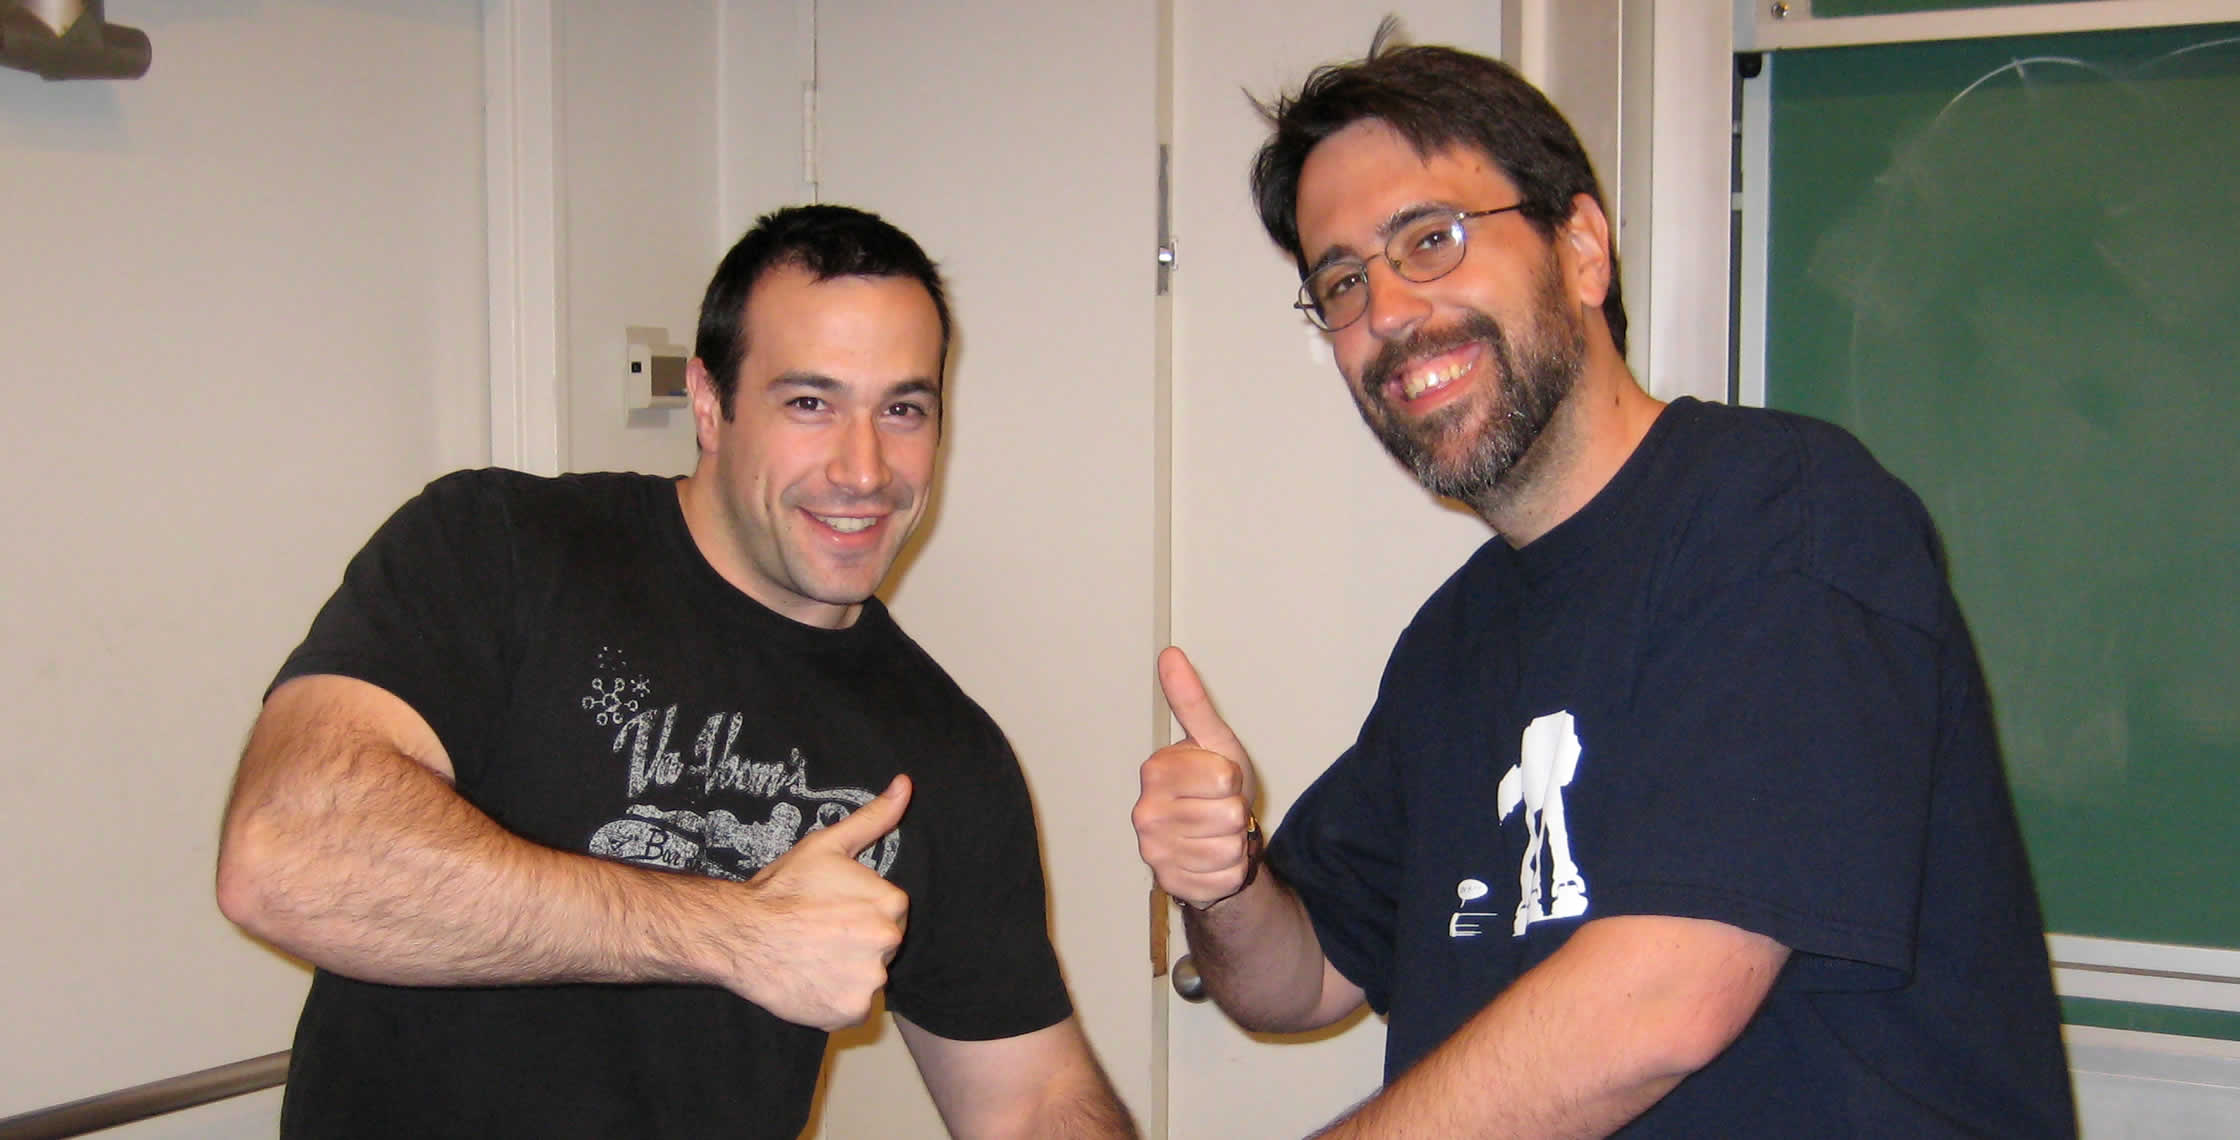 Ben Nadel at the New York ColdFusion User Group (Feb. 2008) with: Ray Camden